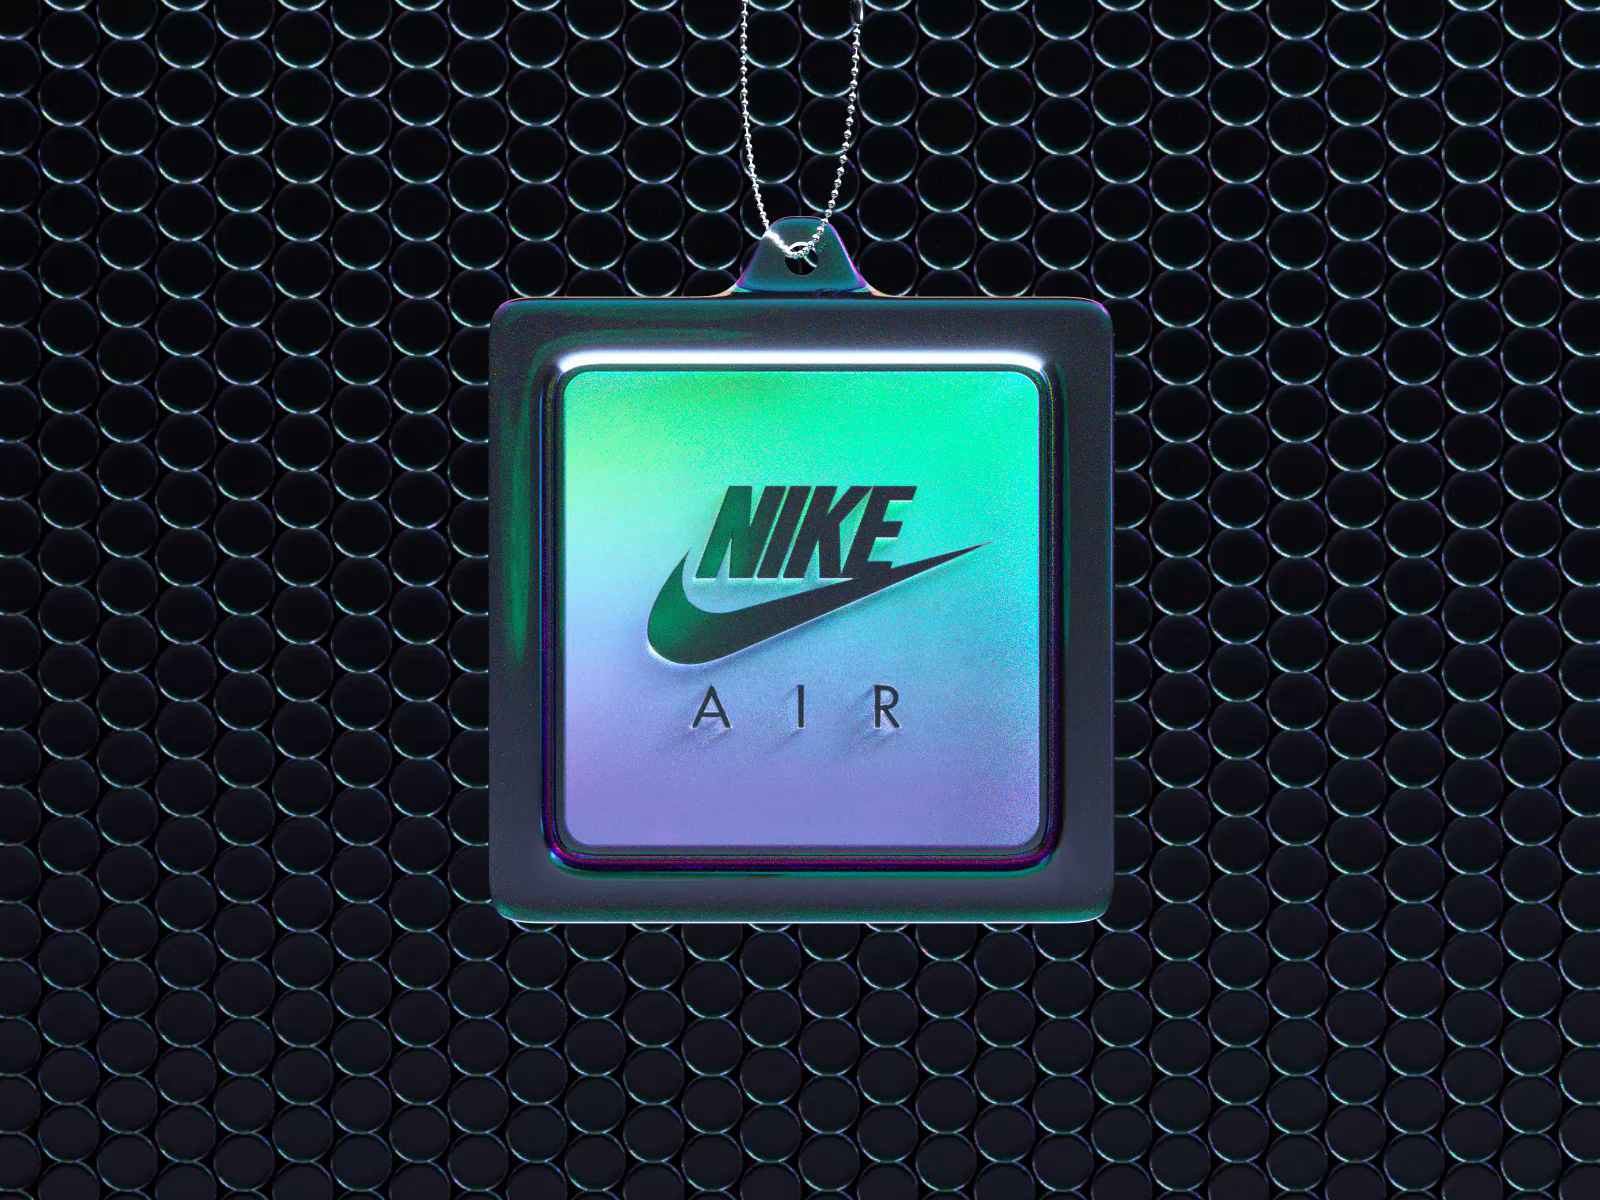 Nike Air Pack by Nathan Riley Unseen Studio® on Dribbble